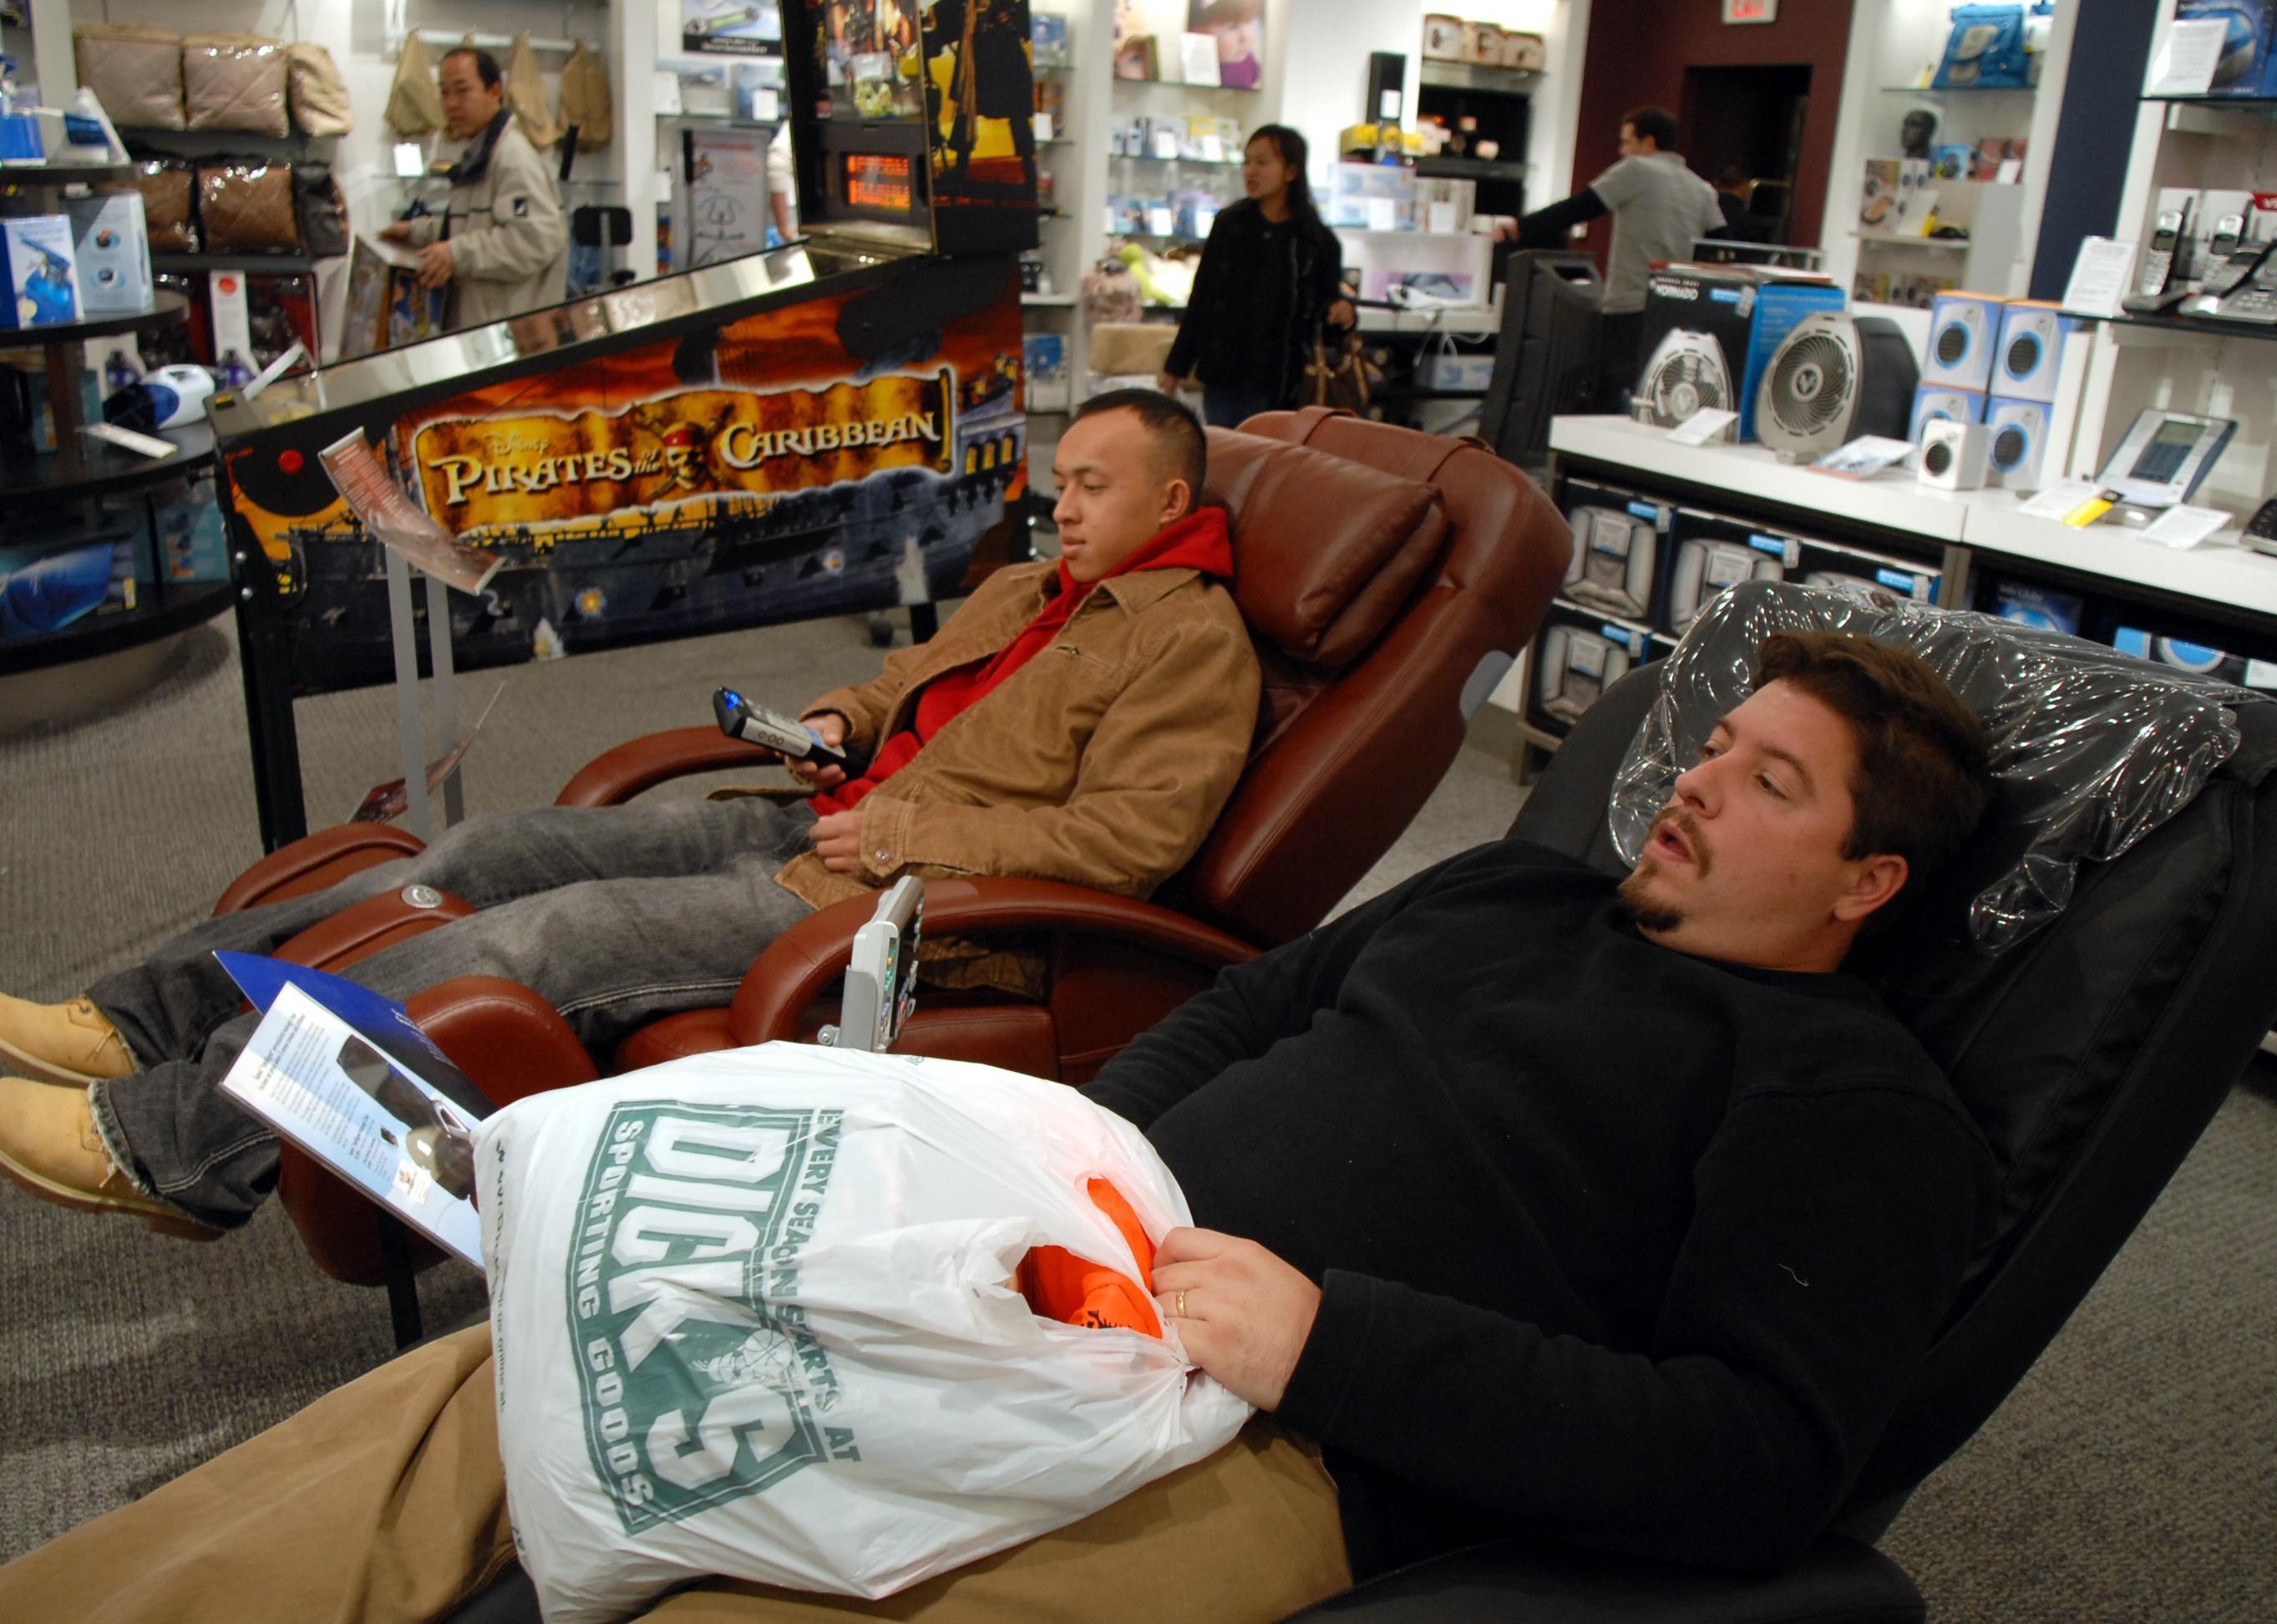 Two men sitting in massage chairs at a Sharper Image store.